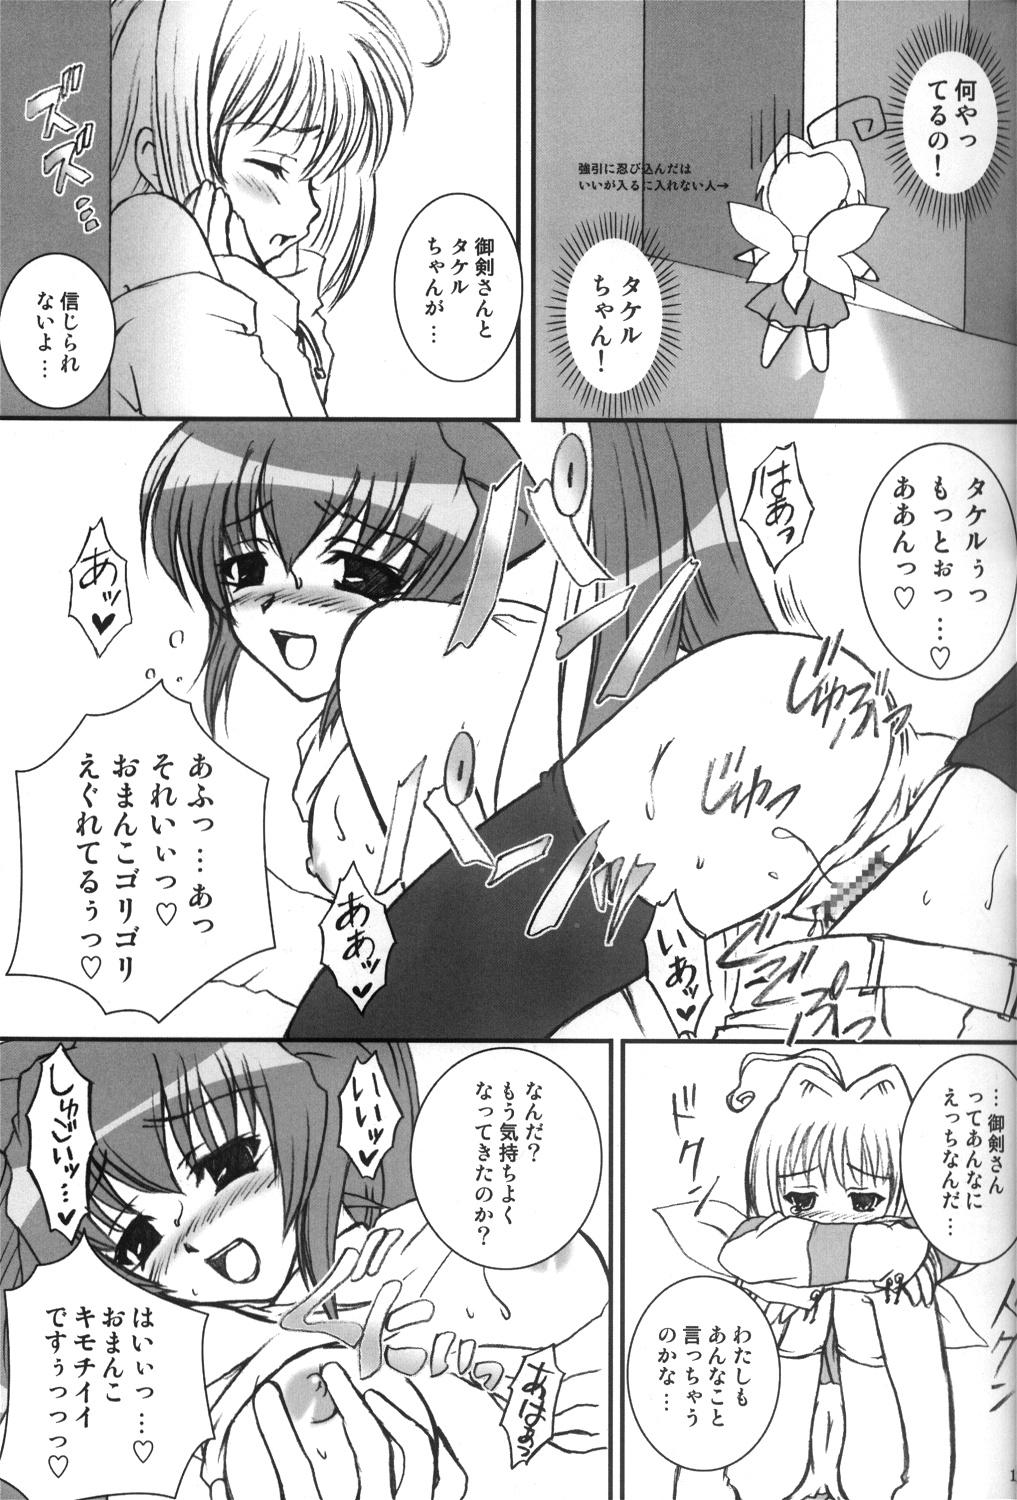 Hand I have fallen in love with you... - Muv-luv Punishment - Page 12